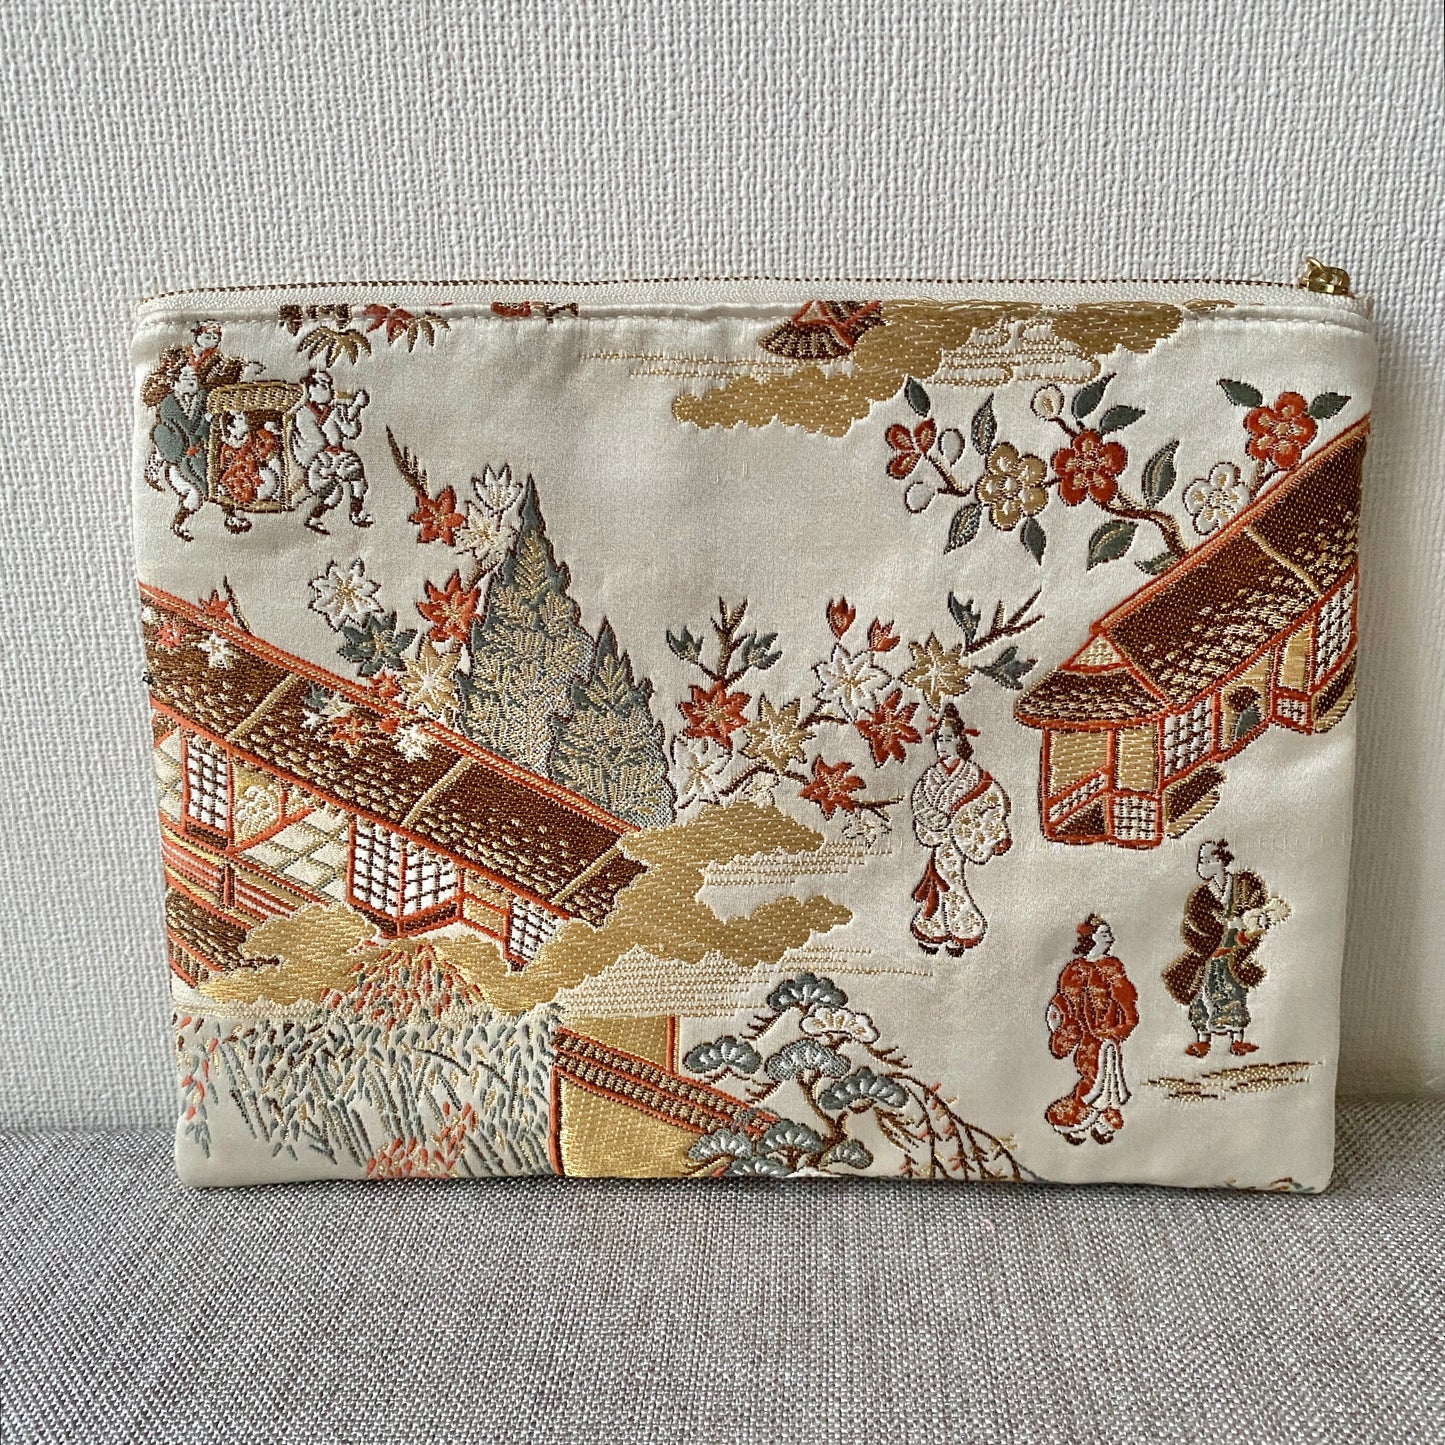 Flat silk Obi pouch, Medium size, Handcrafted, Upcycled, #3001